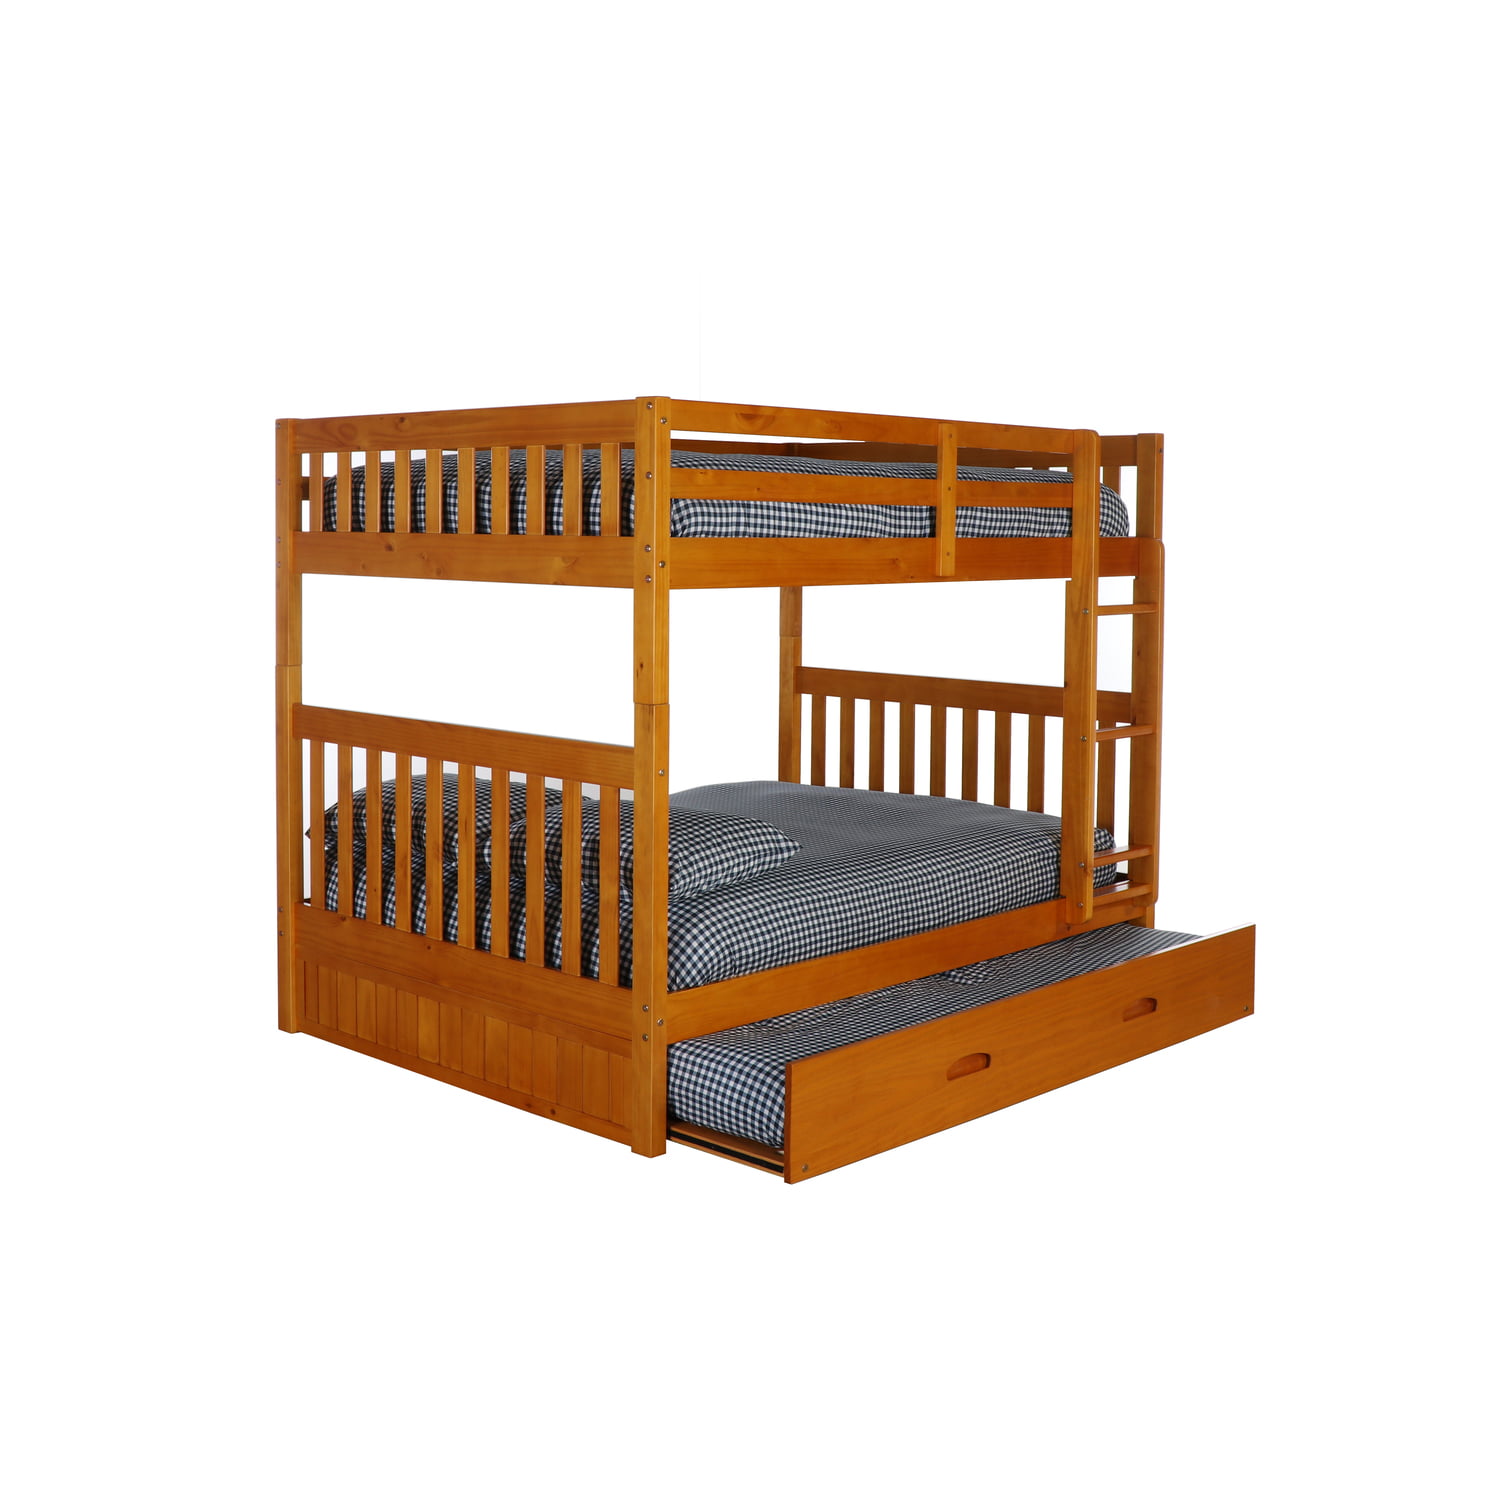 American Furniture Classics Model 2118, Sears Bunk Beds With Trundle